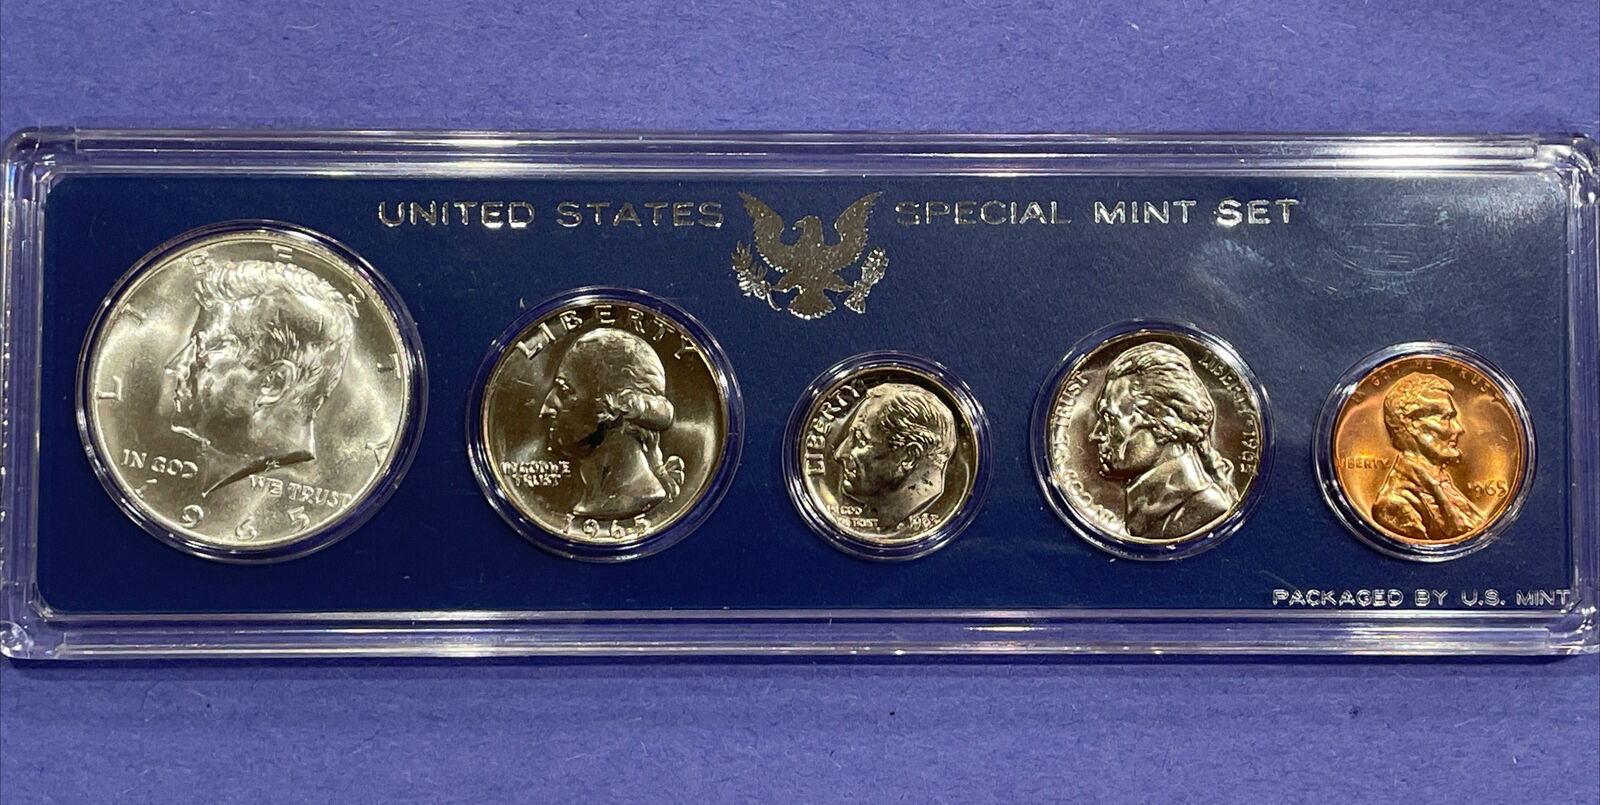 1965 US Special Mint Set Coins In Holder